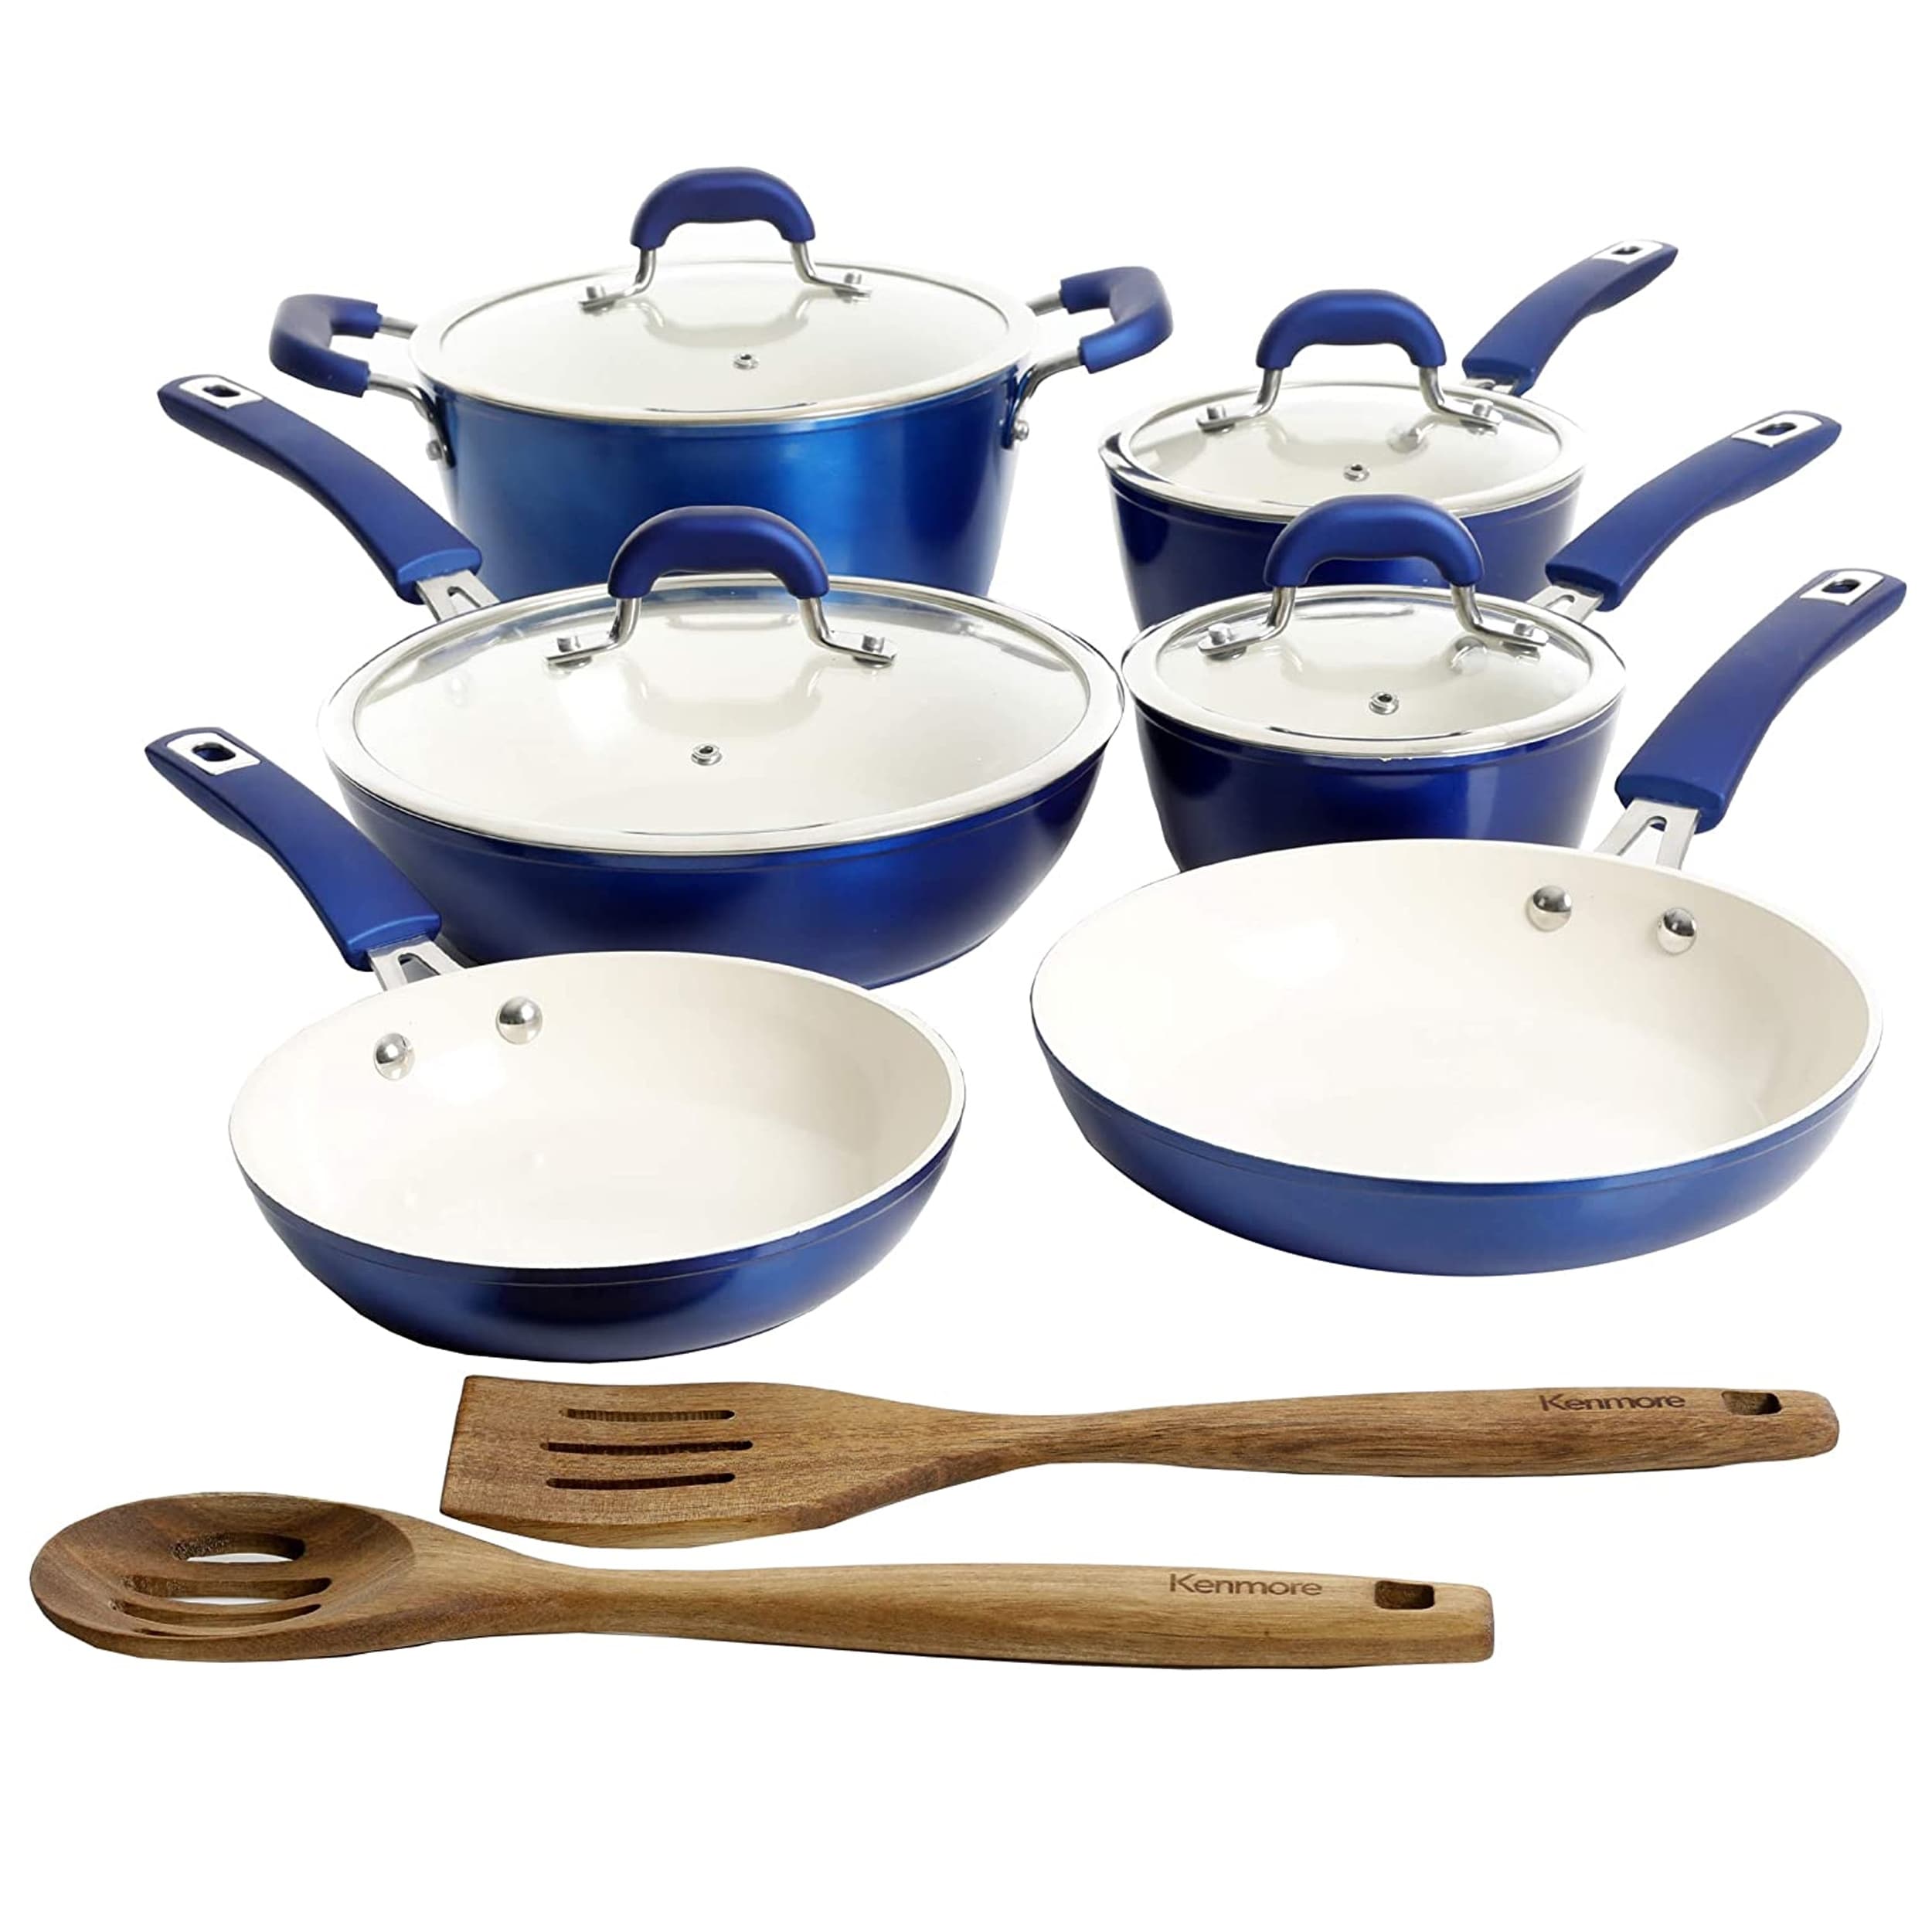 https://ak1.ostkcdn.com/images/products/is/images/direct/bc447bfb730264982aecdcac0216e7b7e1e6aee2/Kenmore-Arlington-Aluminum-Ceramic-Coated-Nonstick-Cookware-Set--Blue.jpg